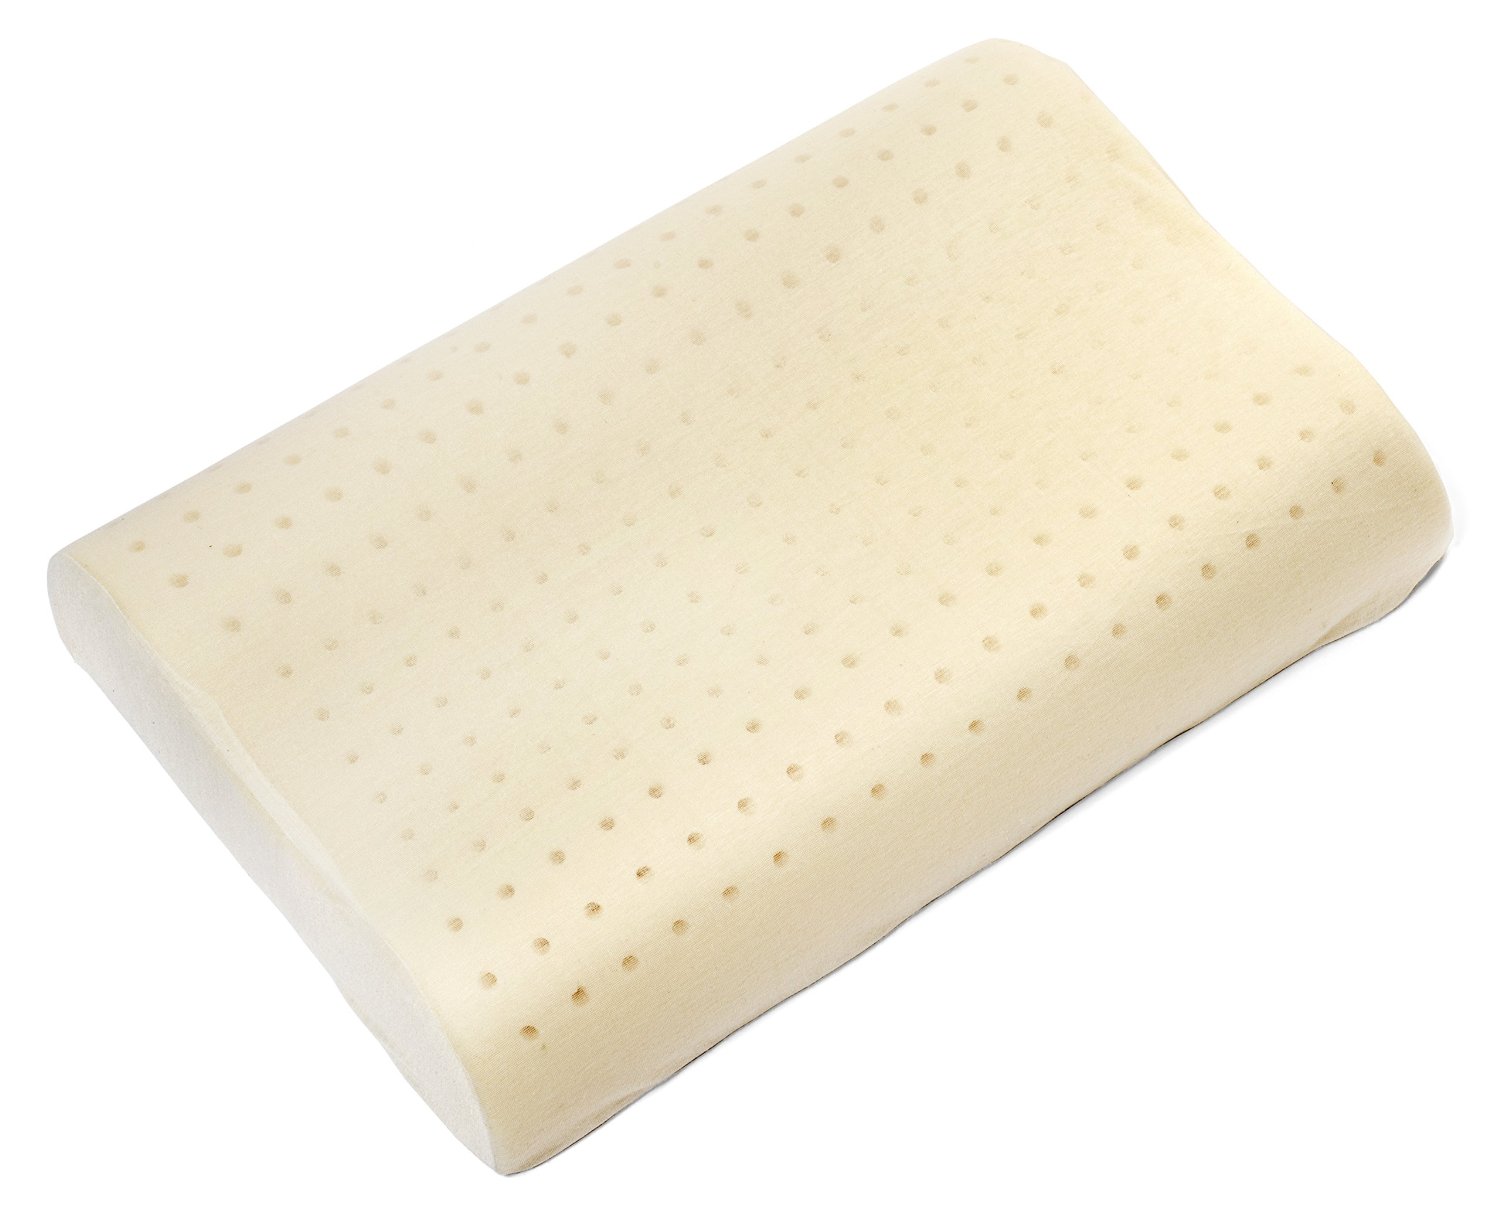 Top 10 Best Memory Foam Pillows to Help You Get High-Quality Sleep